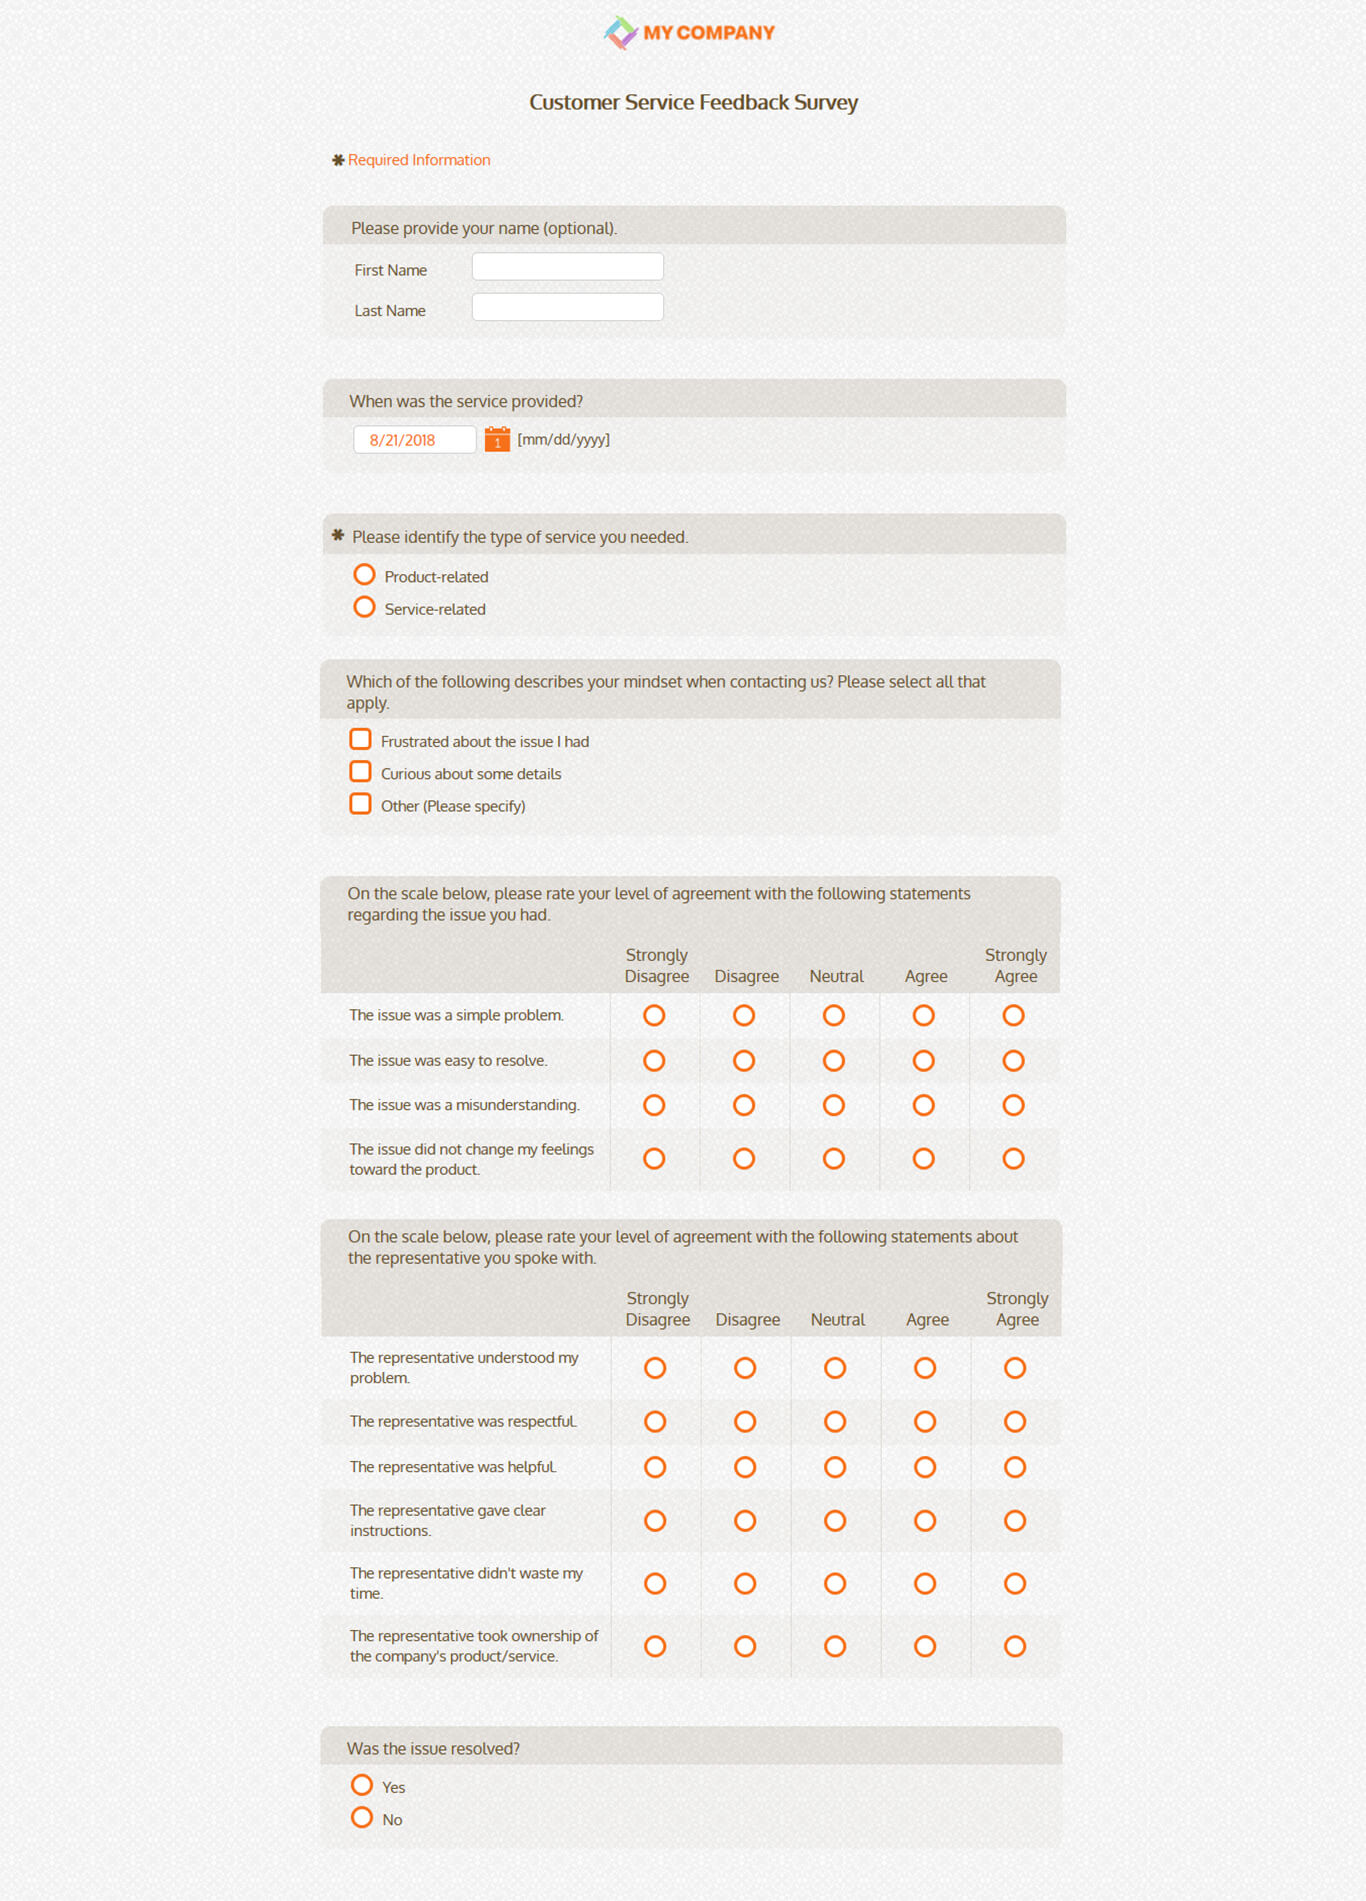 Customer Service Feedback Survey Template [21 Questions In Customer Satisfaction Report Template